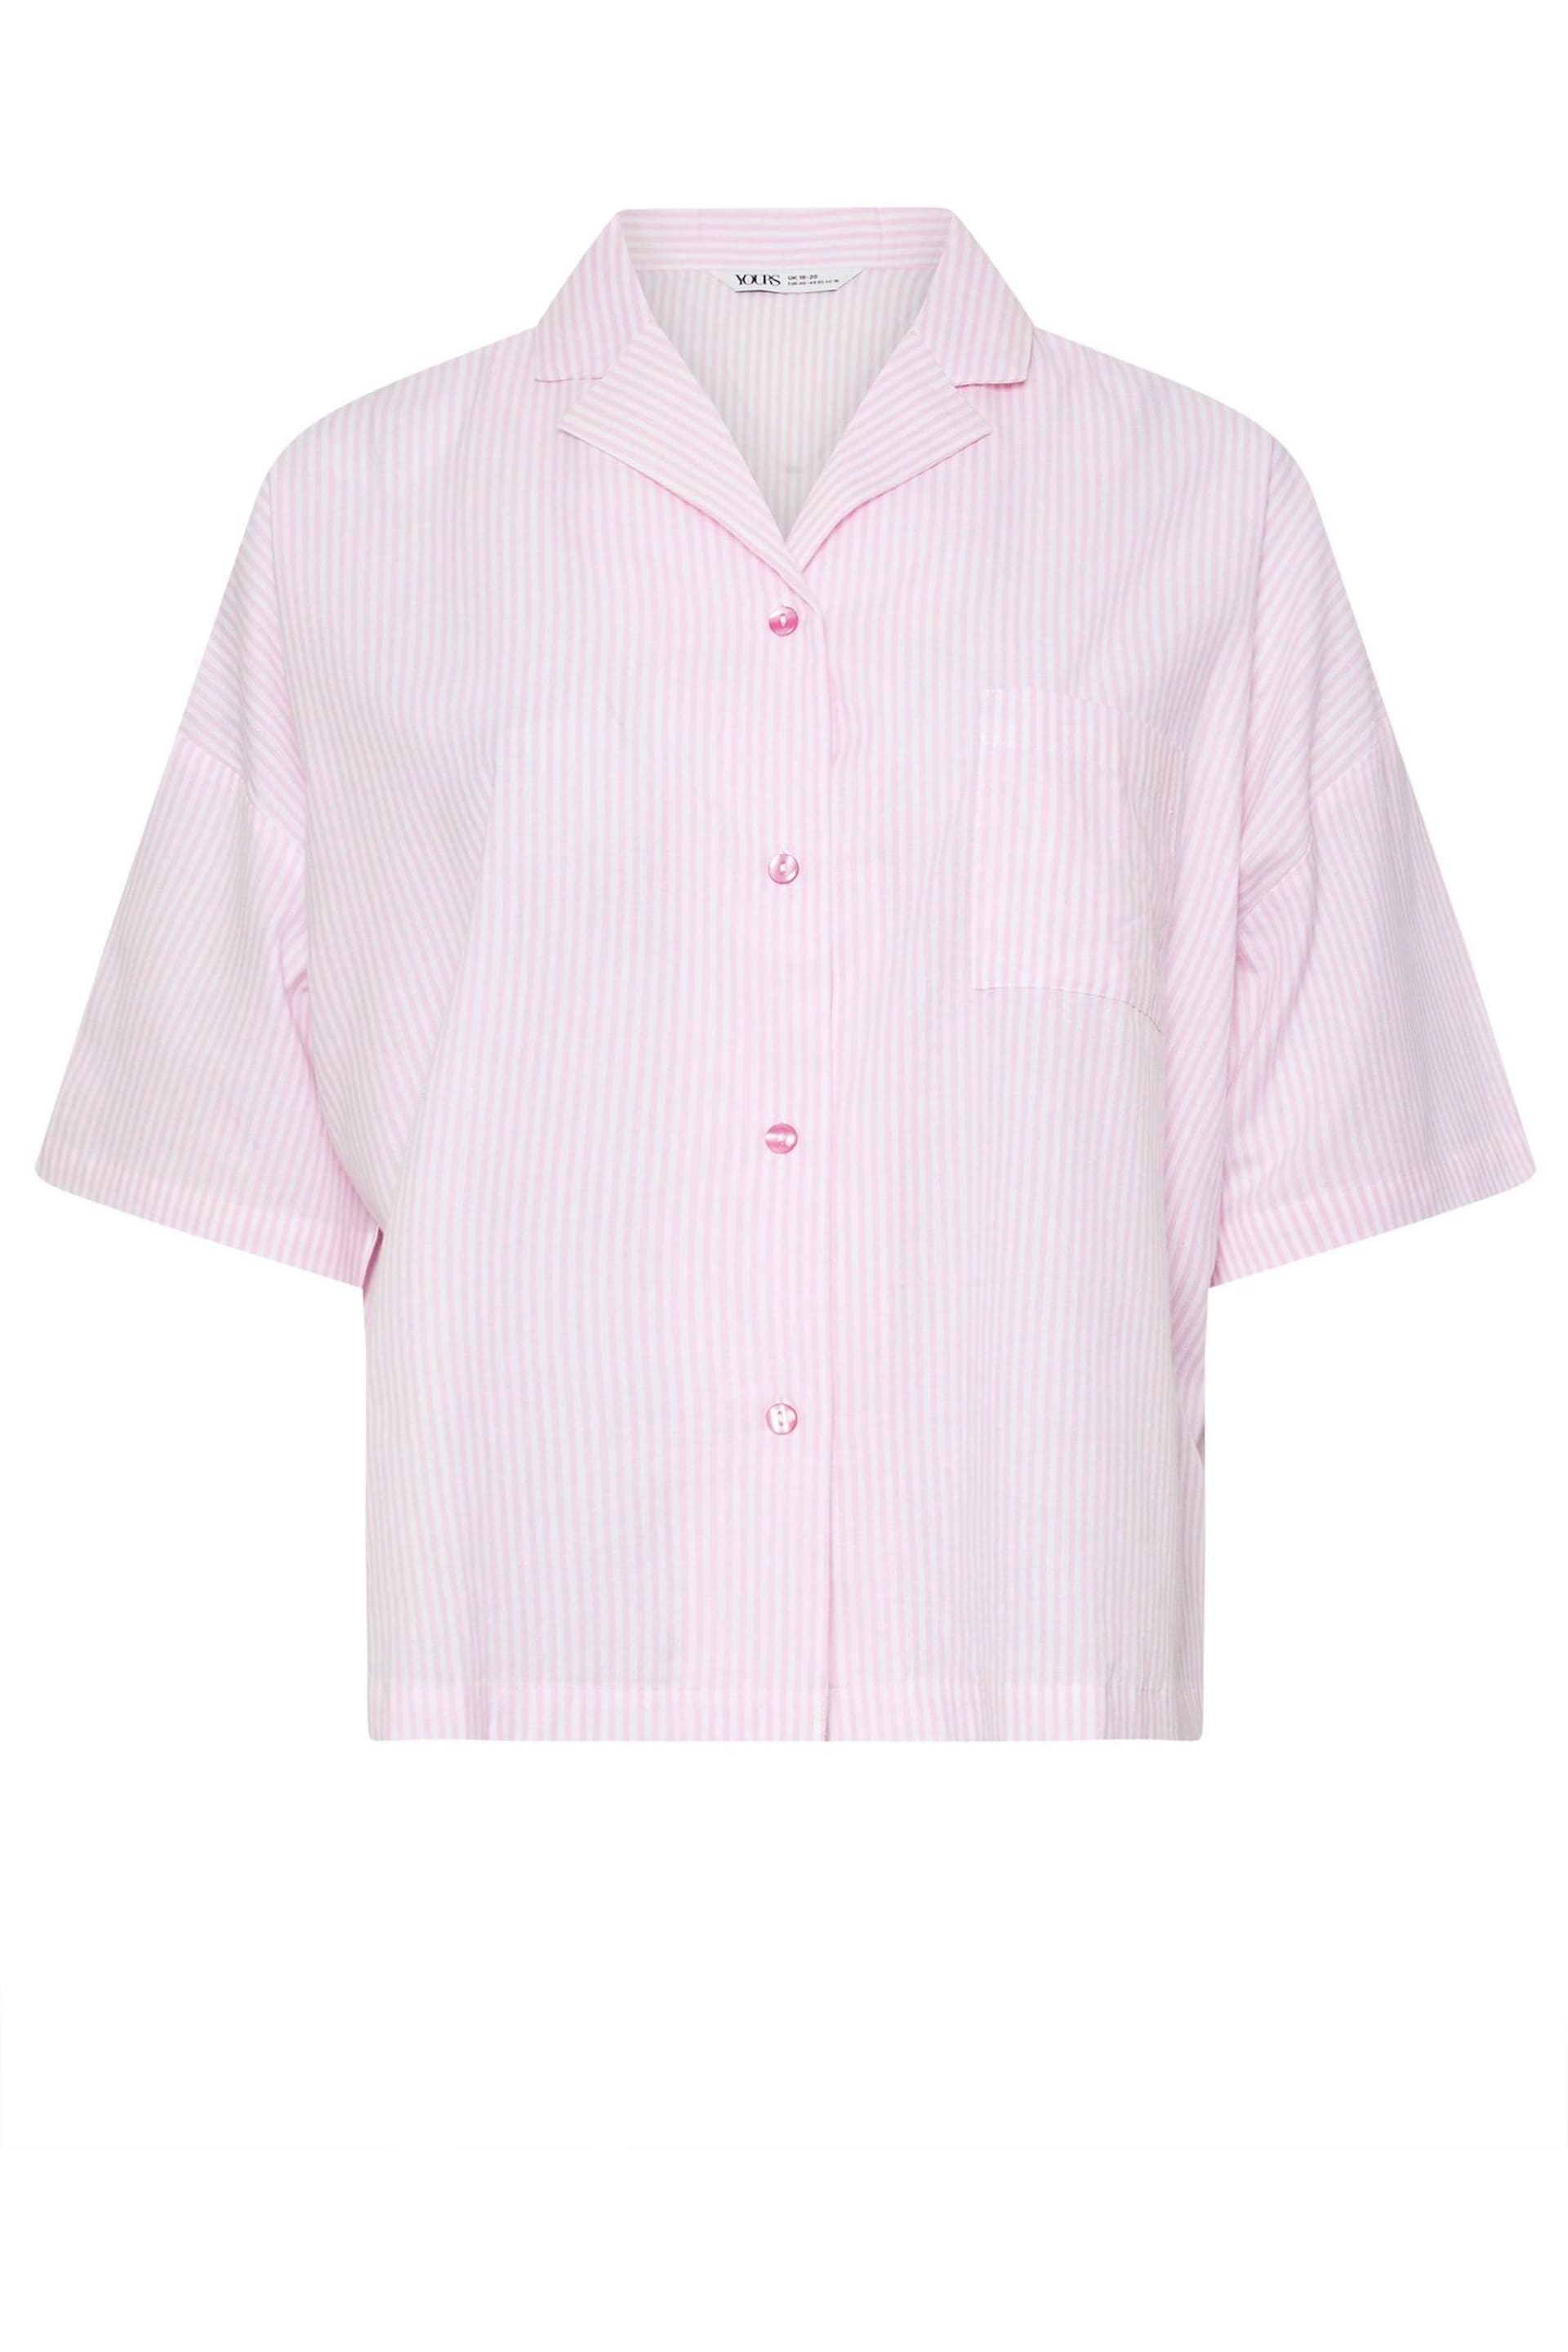 Yours Curve Pink Boyfriend Woven Stripe Shirt - Image 5 of 5